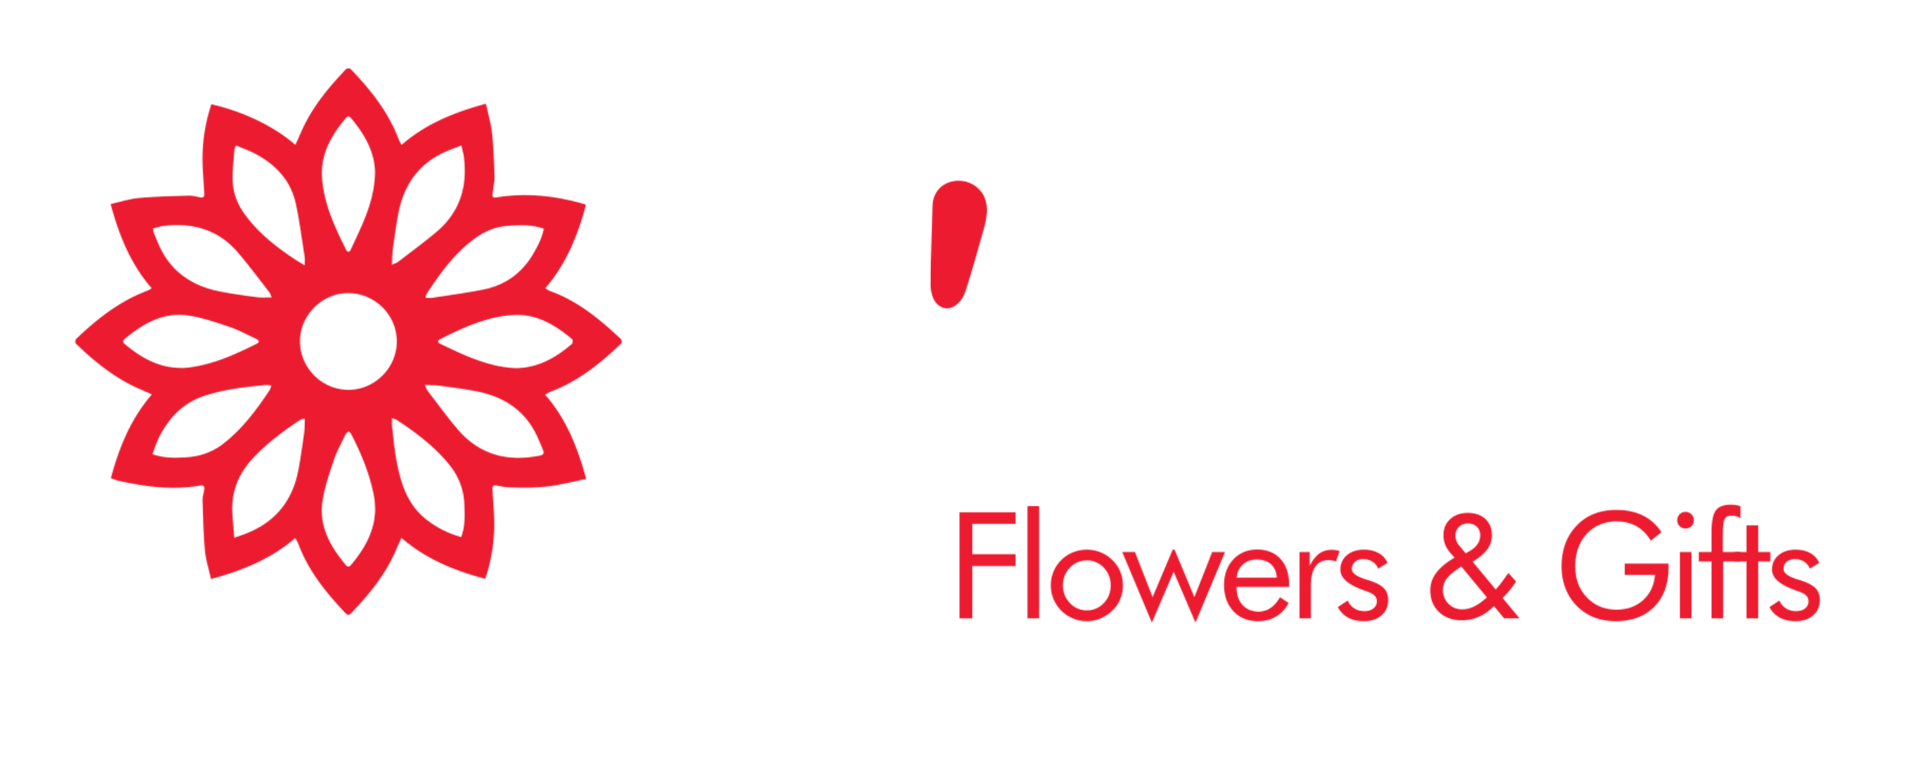 J’adore Flowers & Gifts—Skilled Florists in Cairns